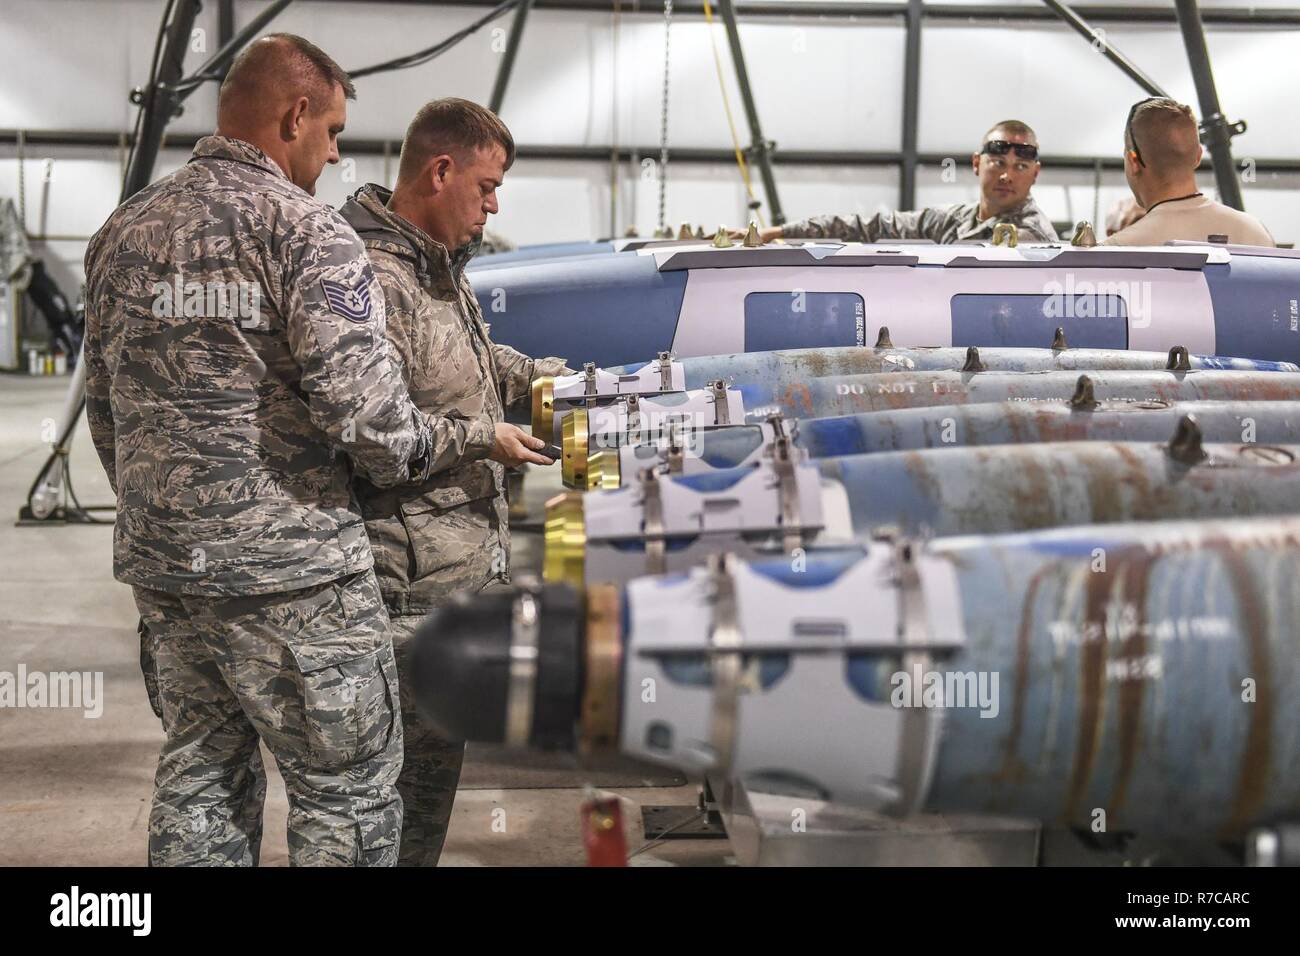 Active-duty Tech. Sgts. Mike McKinney, foreground, and James Underwood, both 301st Fighter Wing, Naval Air Station Fort Worth Joint Reserve Base, Texas, build GBU-38 and GBU-54 bombs April 26 at Hill Air Force Base, Utah. McKinney and Underwood participated in Combat Hammer, an air-to-ground weapons evaluation exercise which collects and analyzes data on the performance of precision weapons and measures their suitability for use in combat. Stock Photo